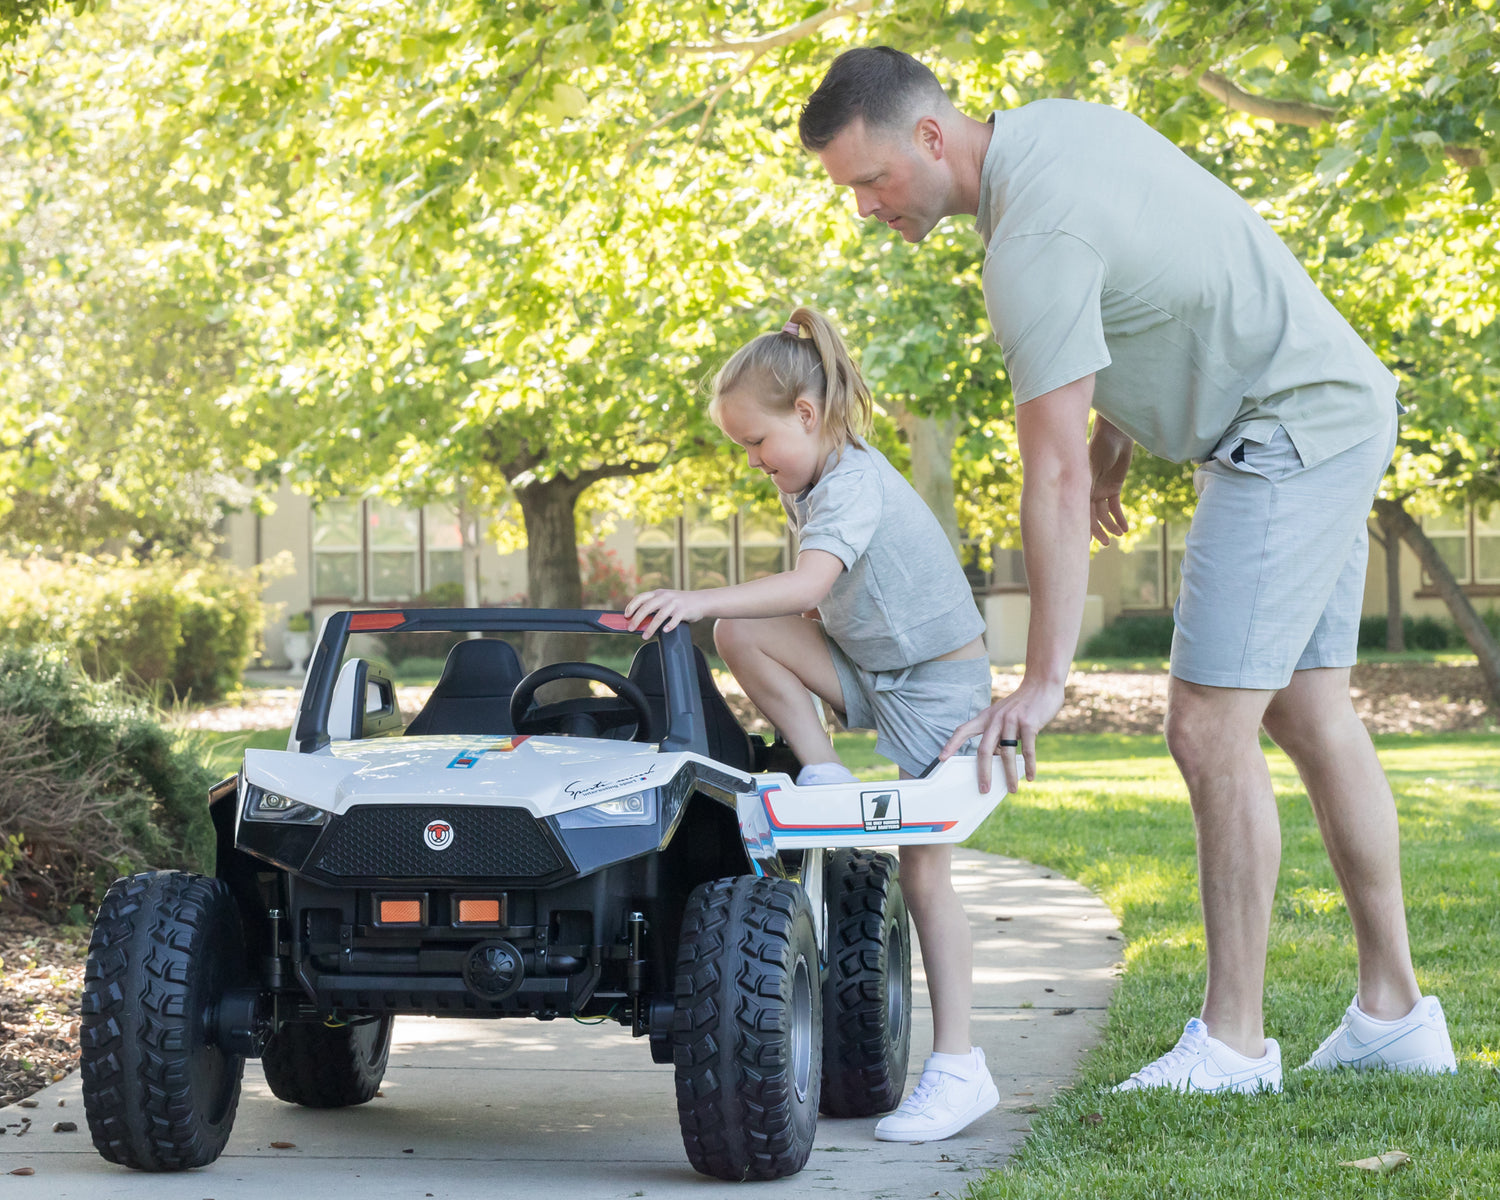 Parent-Child Bonding: Playing Together with Kids Cars